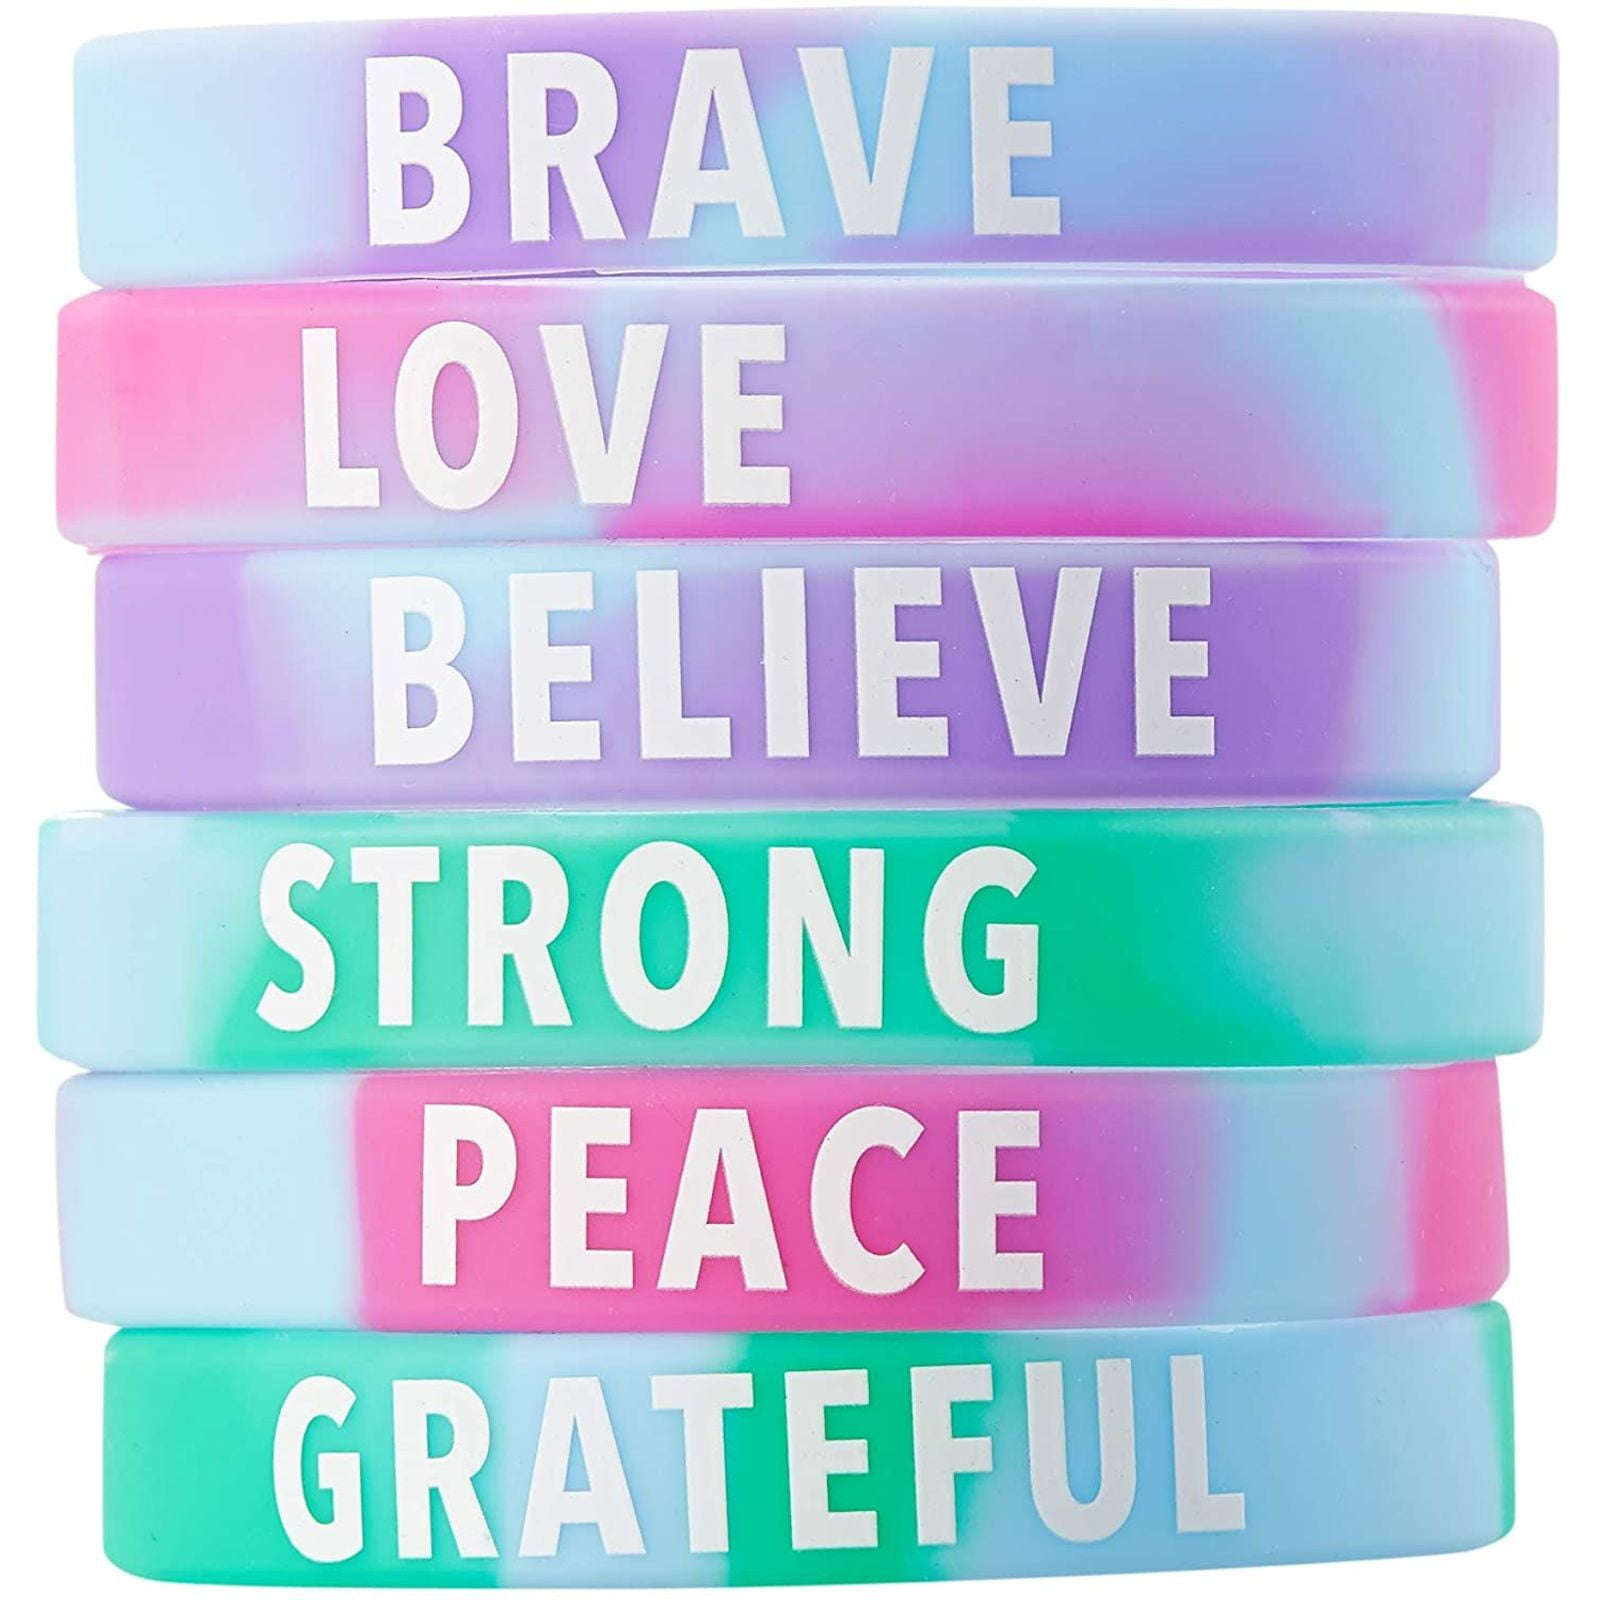 Black Pride Movement Equality Peace Justice Unisex for Men Women Teens Silicone Motivational Wristbands AMPM Collective Rubber Inspirational Quote Bracelets 6/12/24 